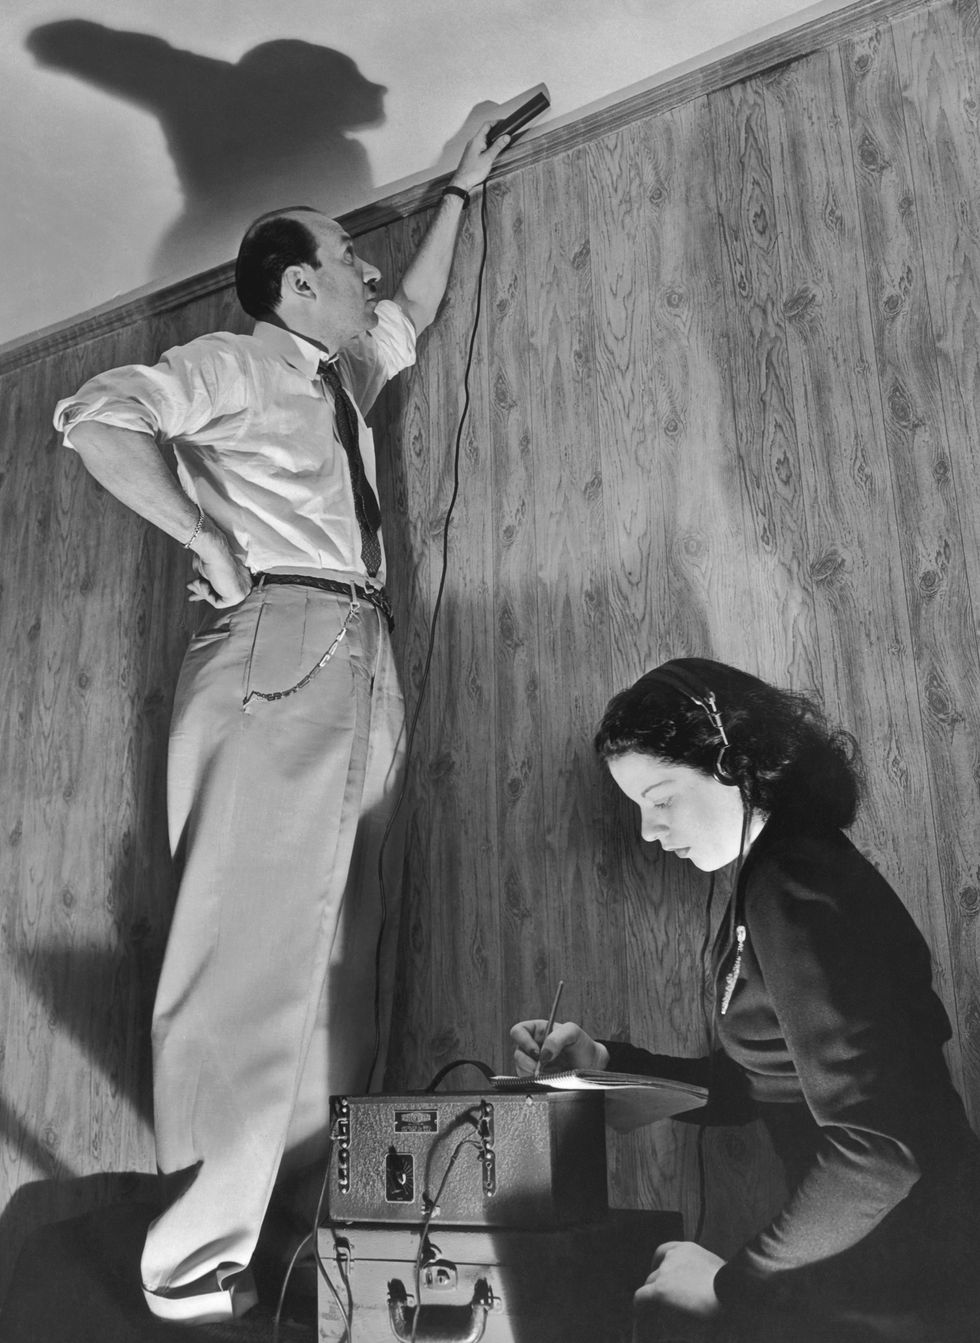 A man places an electronic device near a wire while a woman operates recording gear.